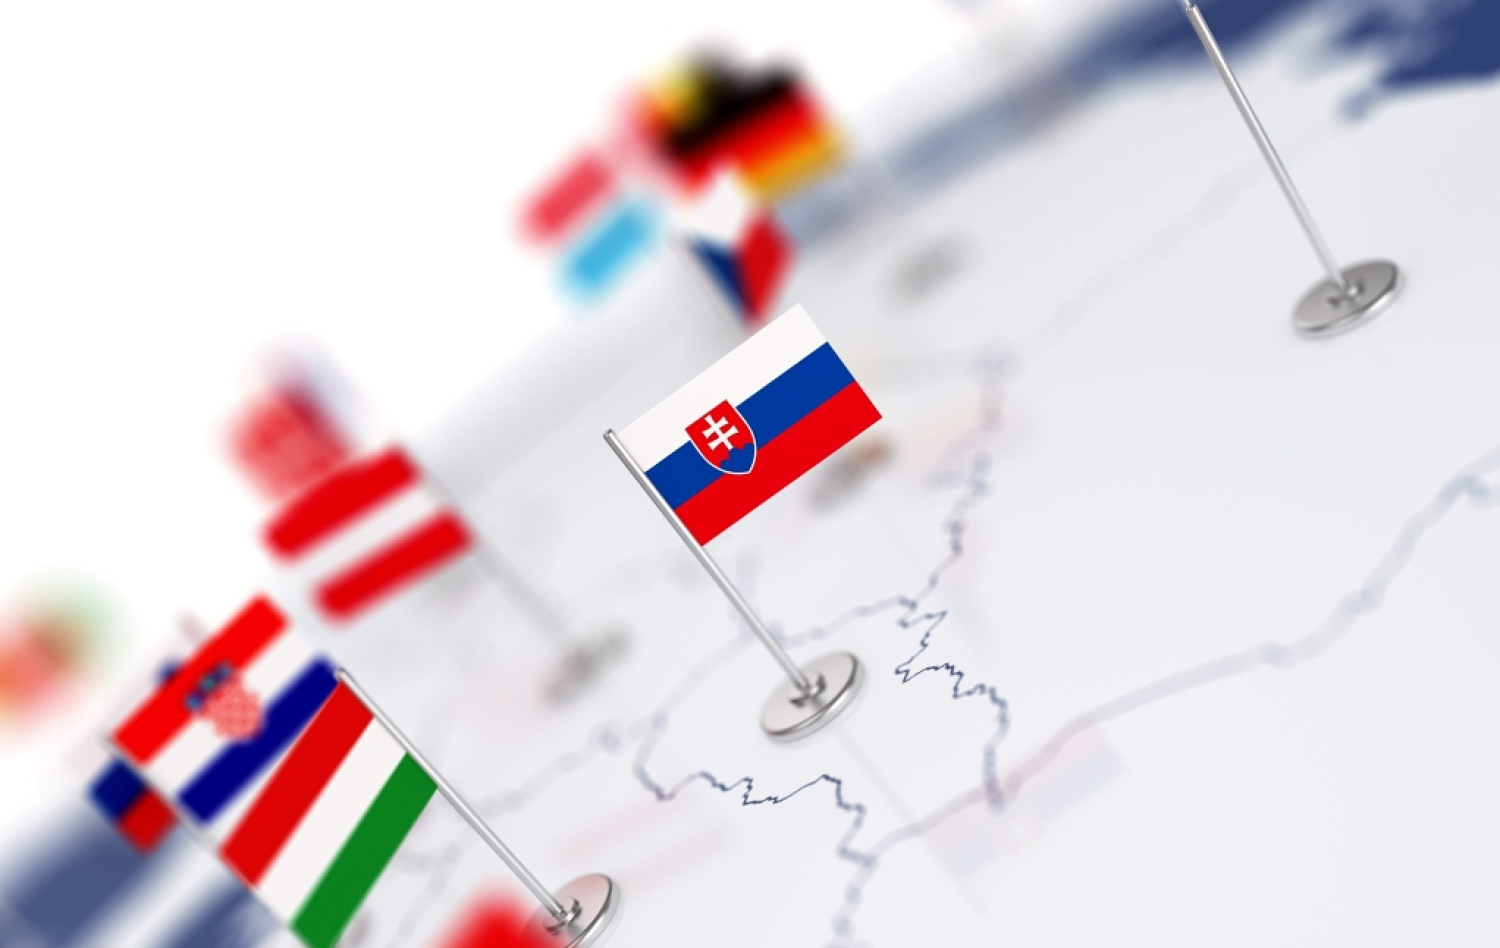 Safic-Alcan strengthens its position in Central Europe by establishing a Slovak branch